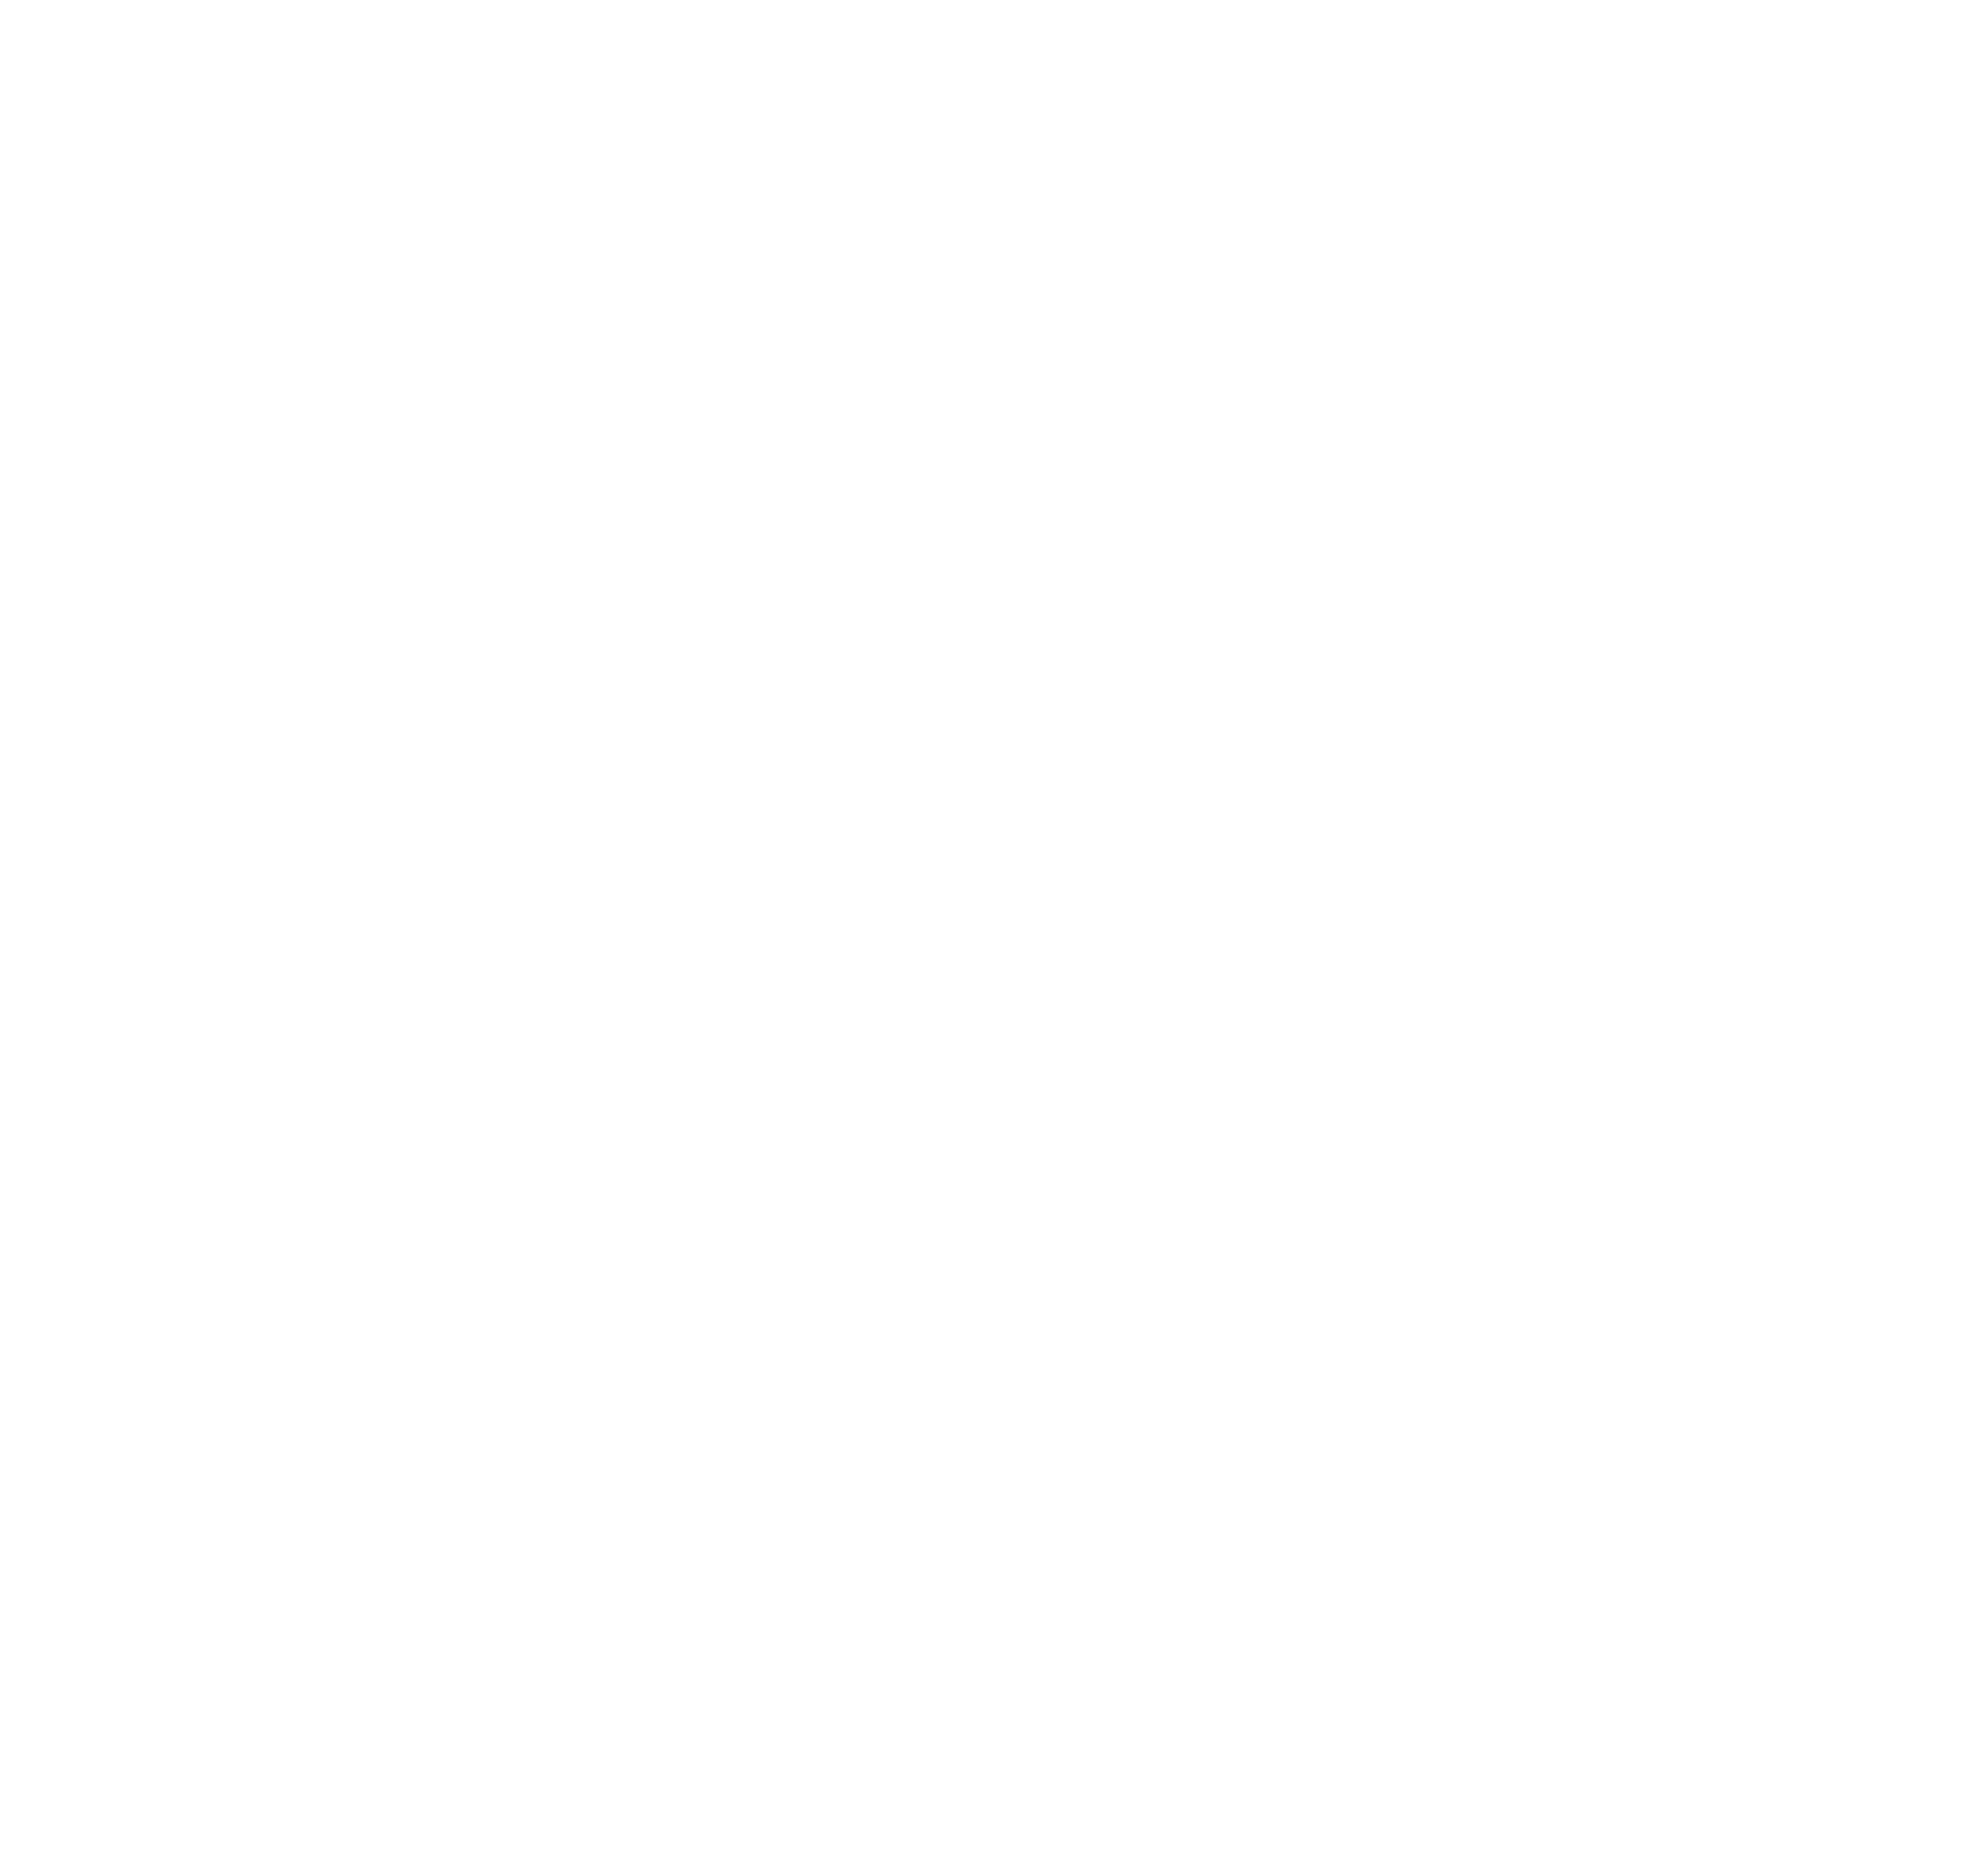 FLYSCABRIS PARTNER SOUTHDRONE